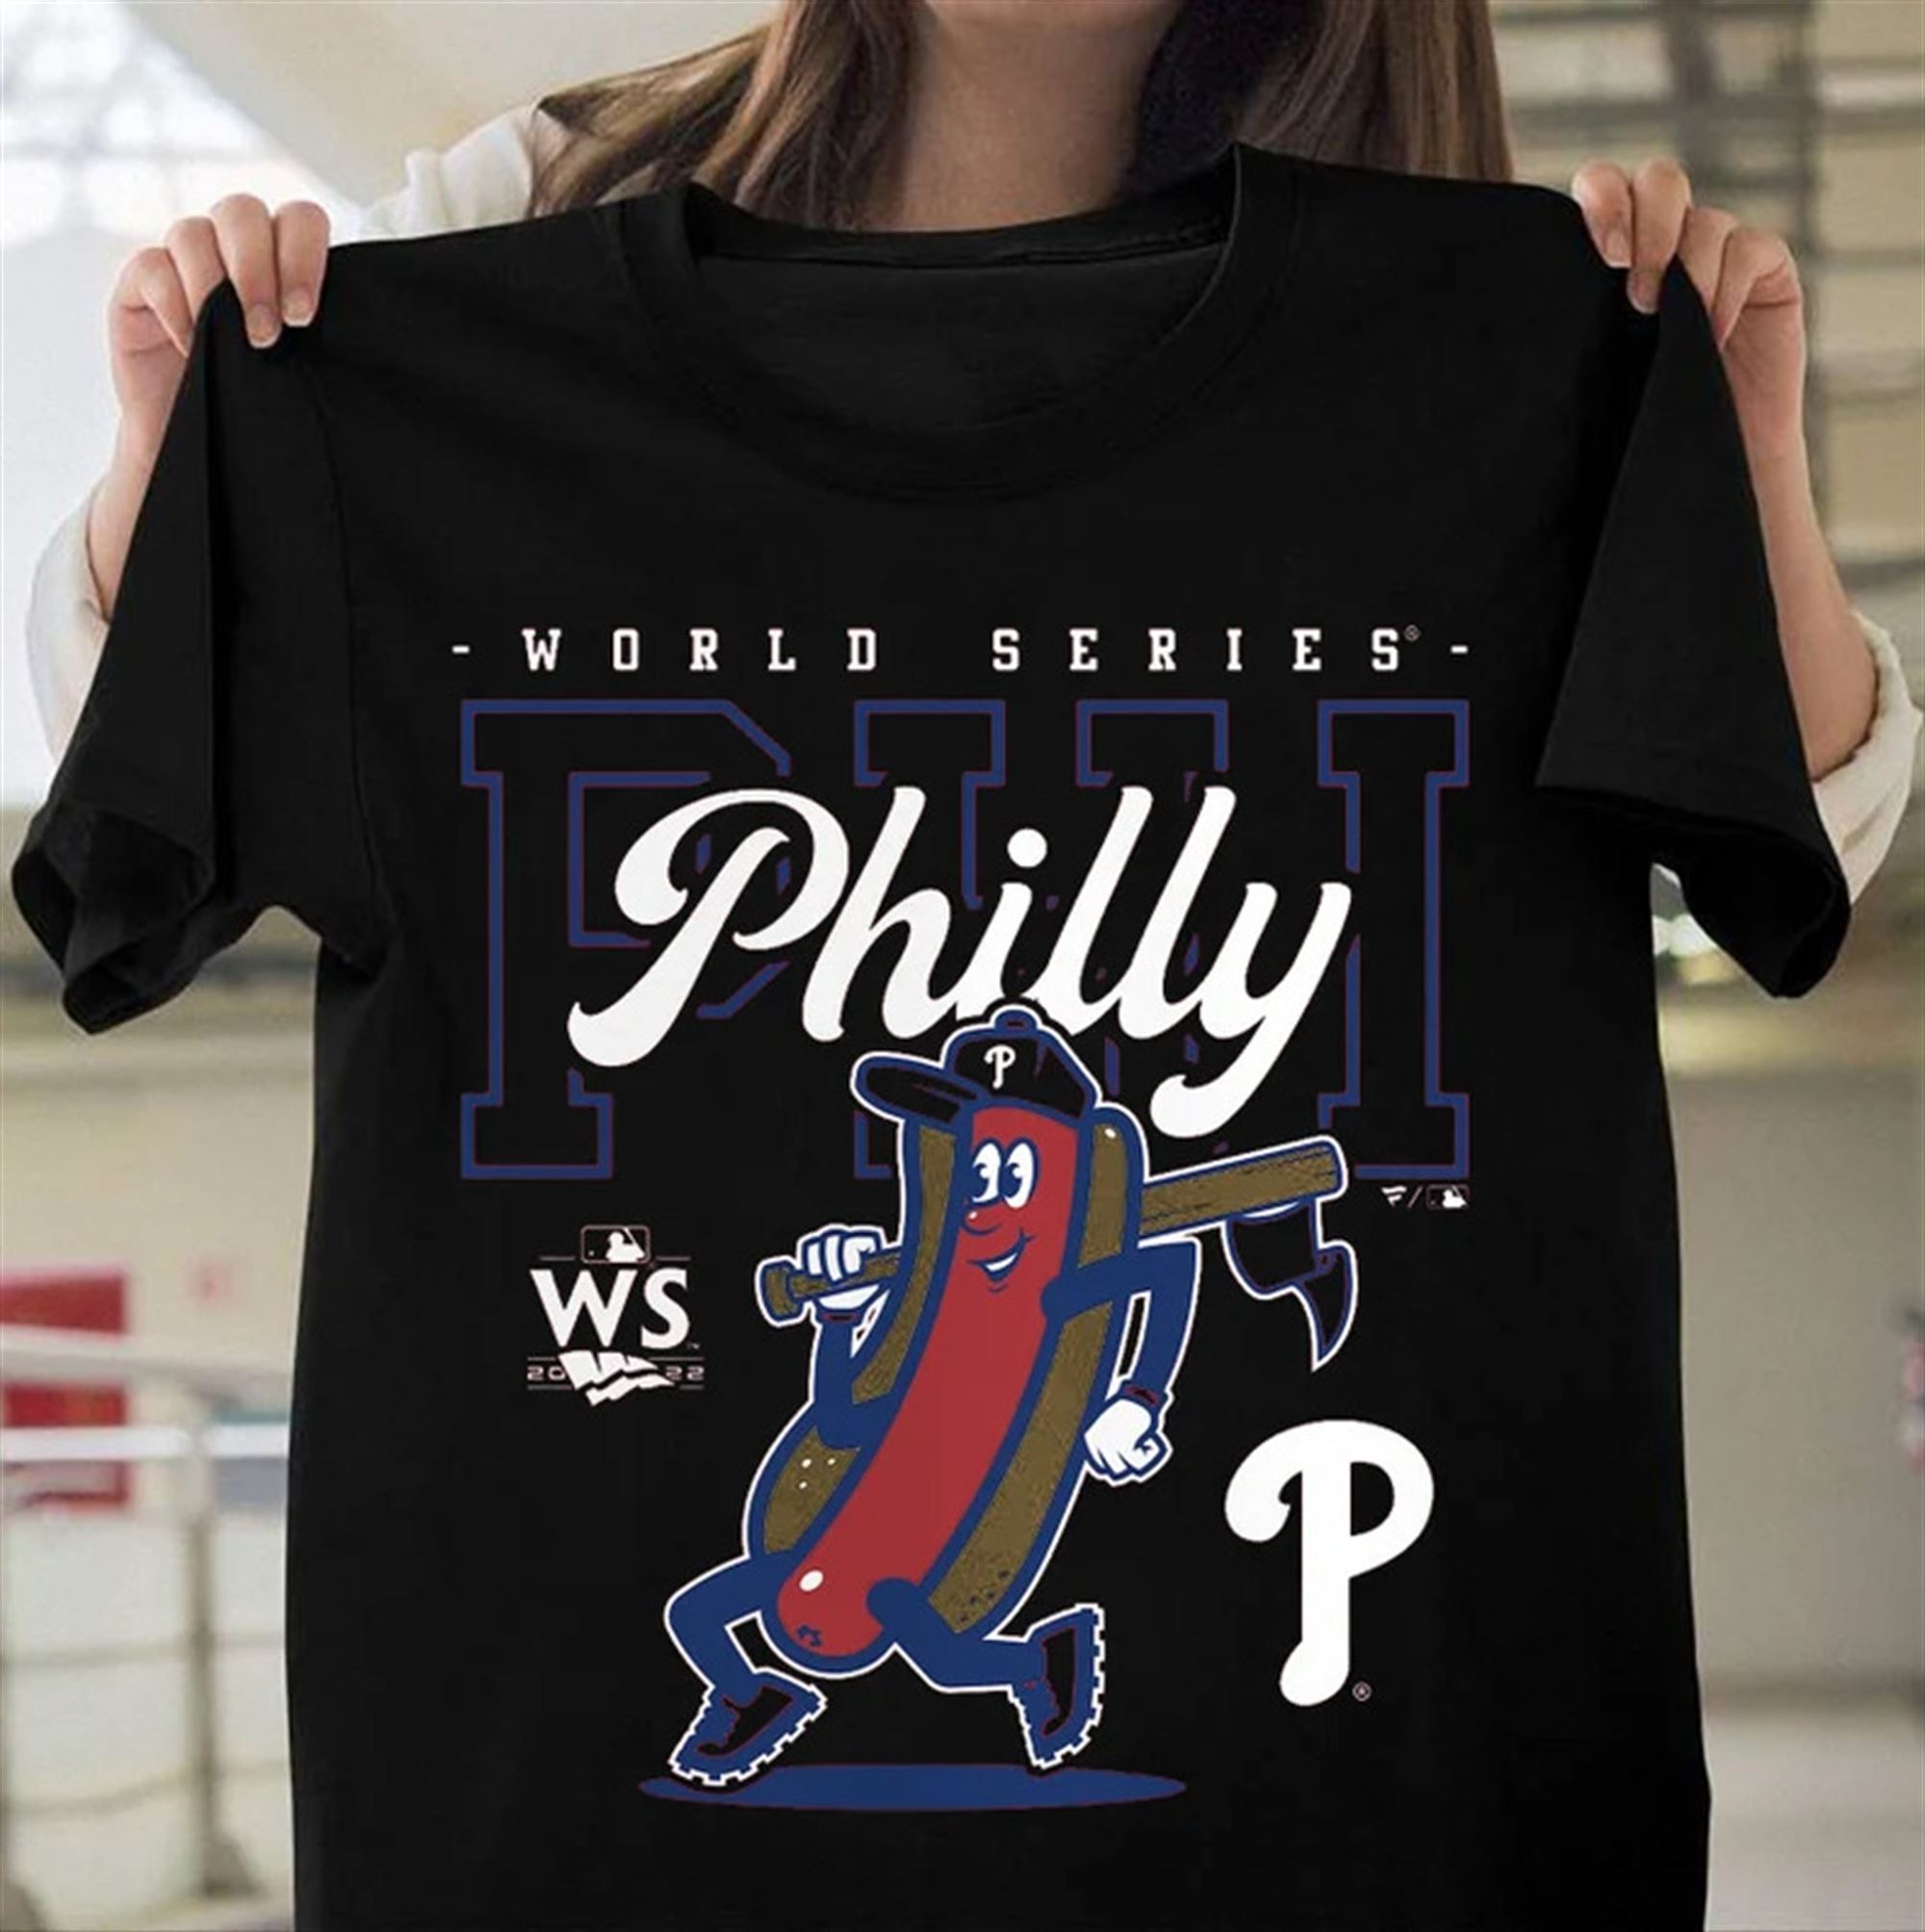 Philadelphia Phillies 2022 World Series On To Victory T-shirt Full Size Up To 5xl